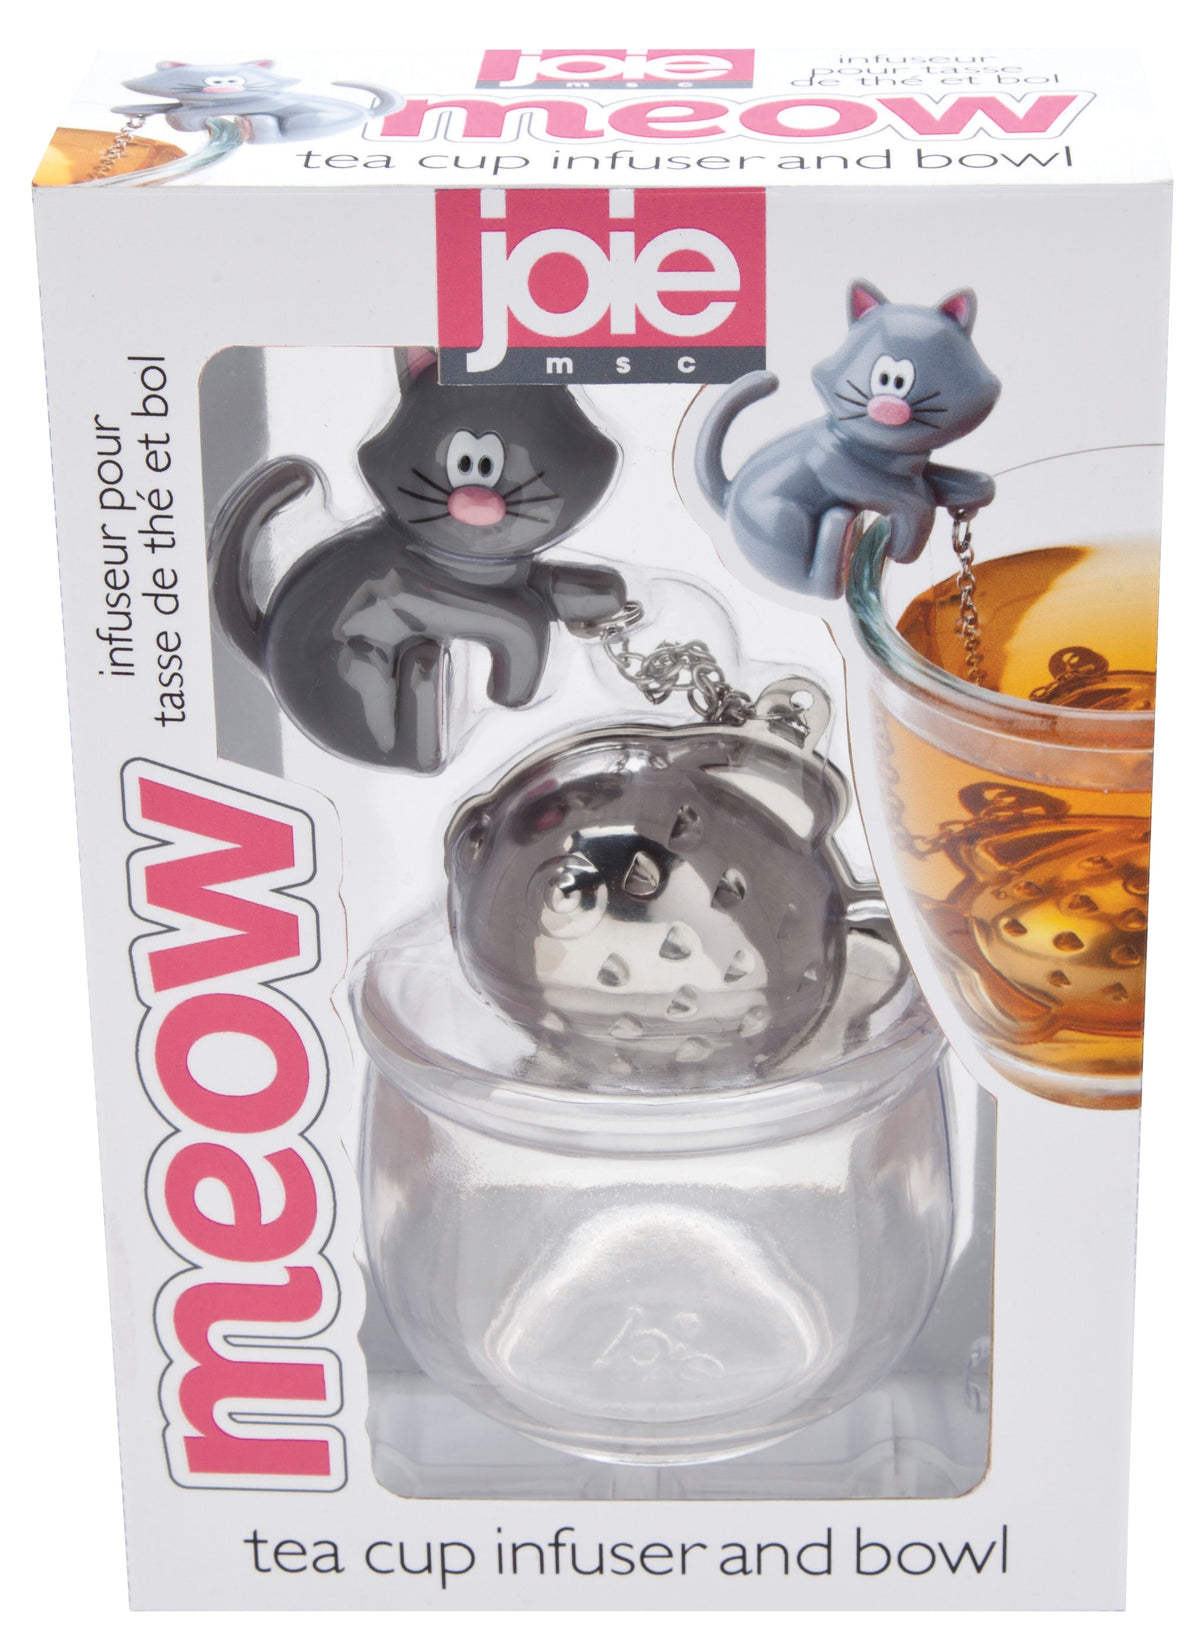 Joie MSC 10065 Meow-Tea Cup Infuser & Bowl, Assorted Colors